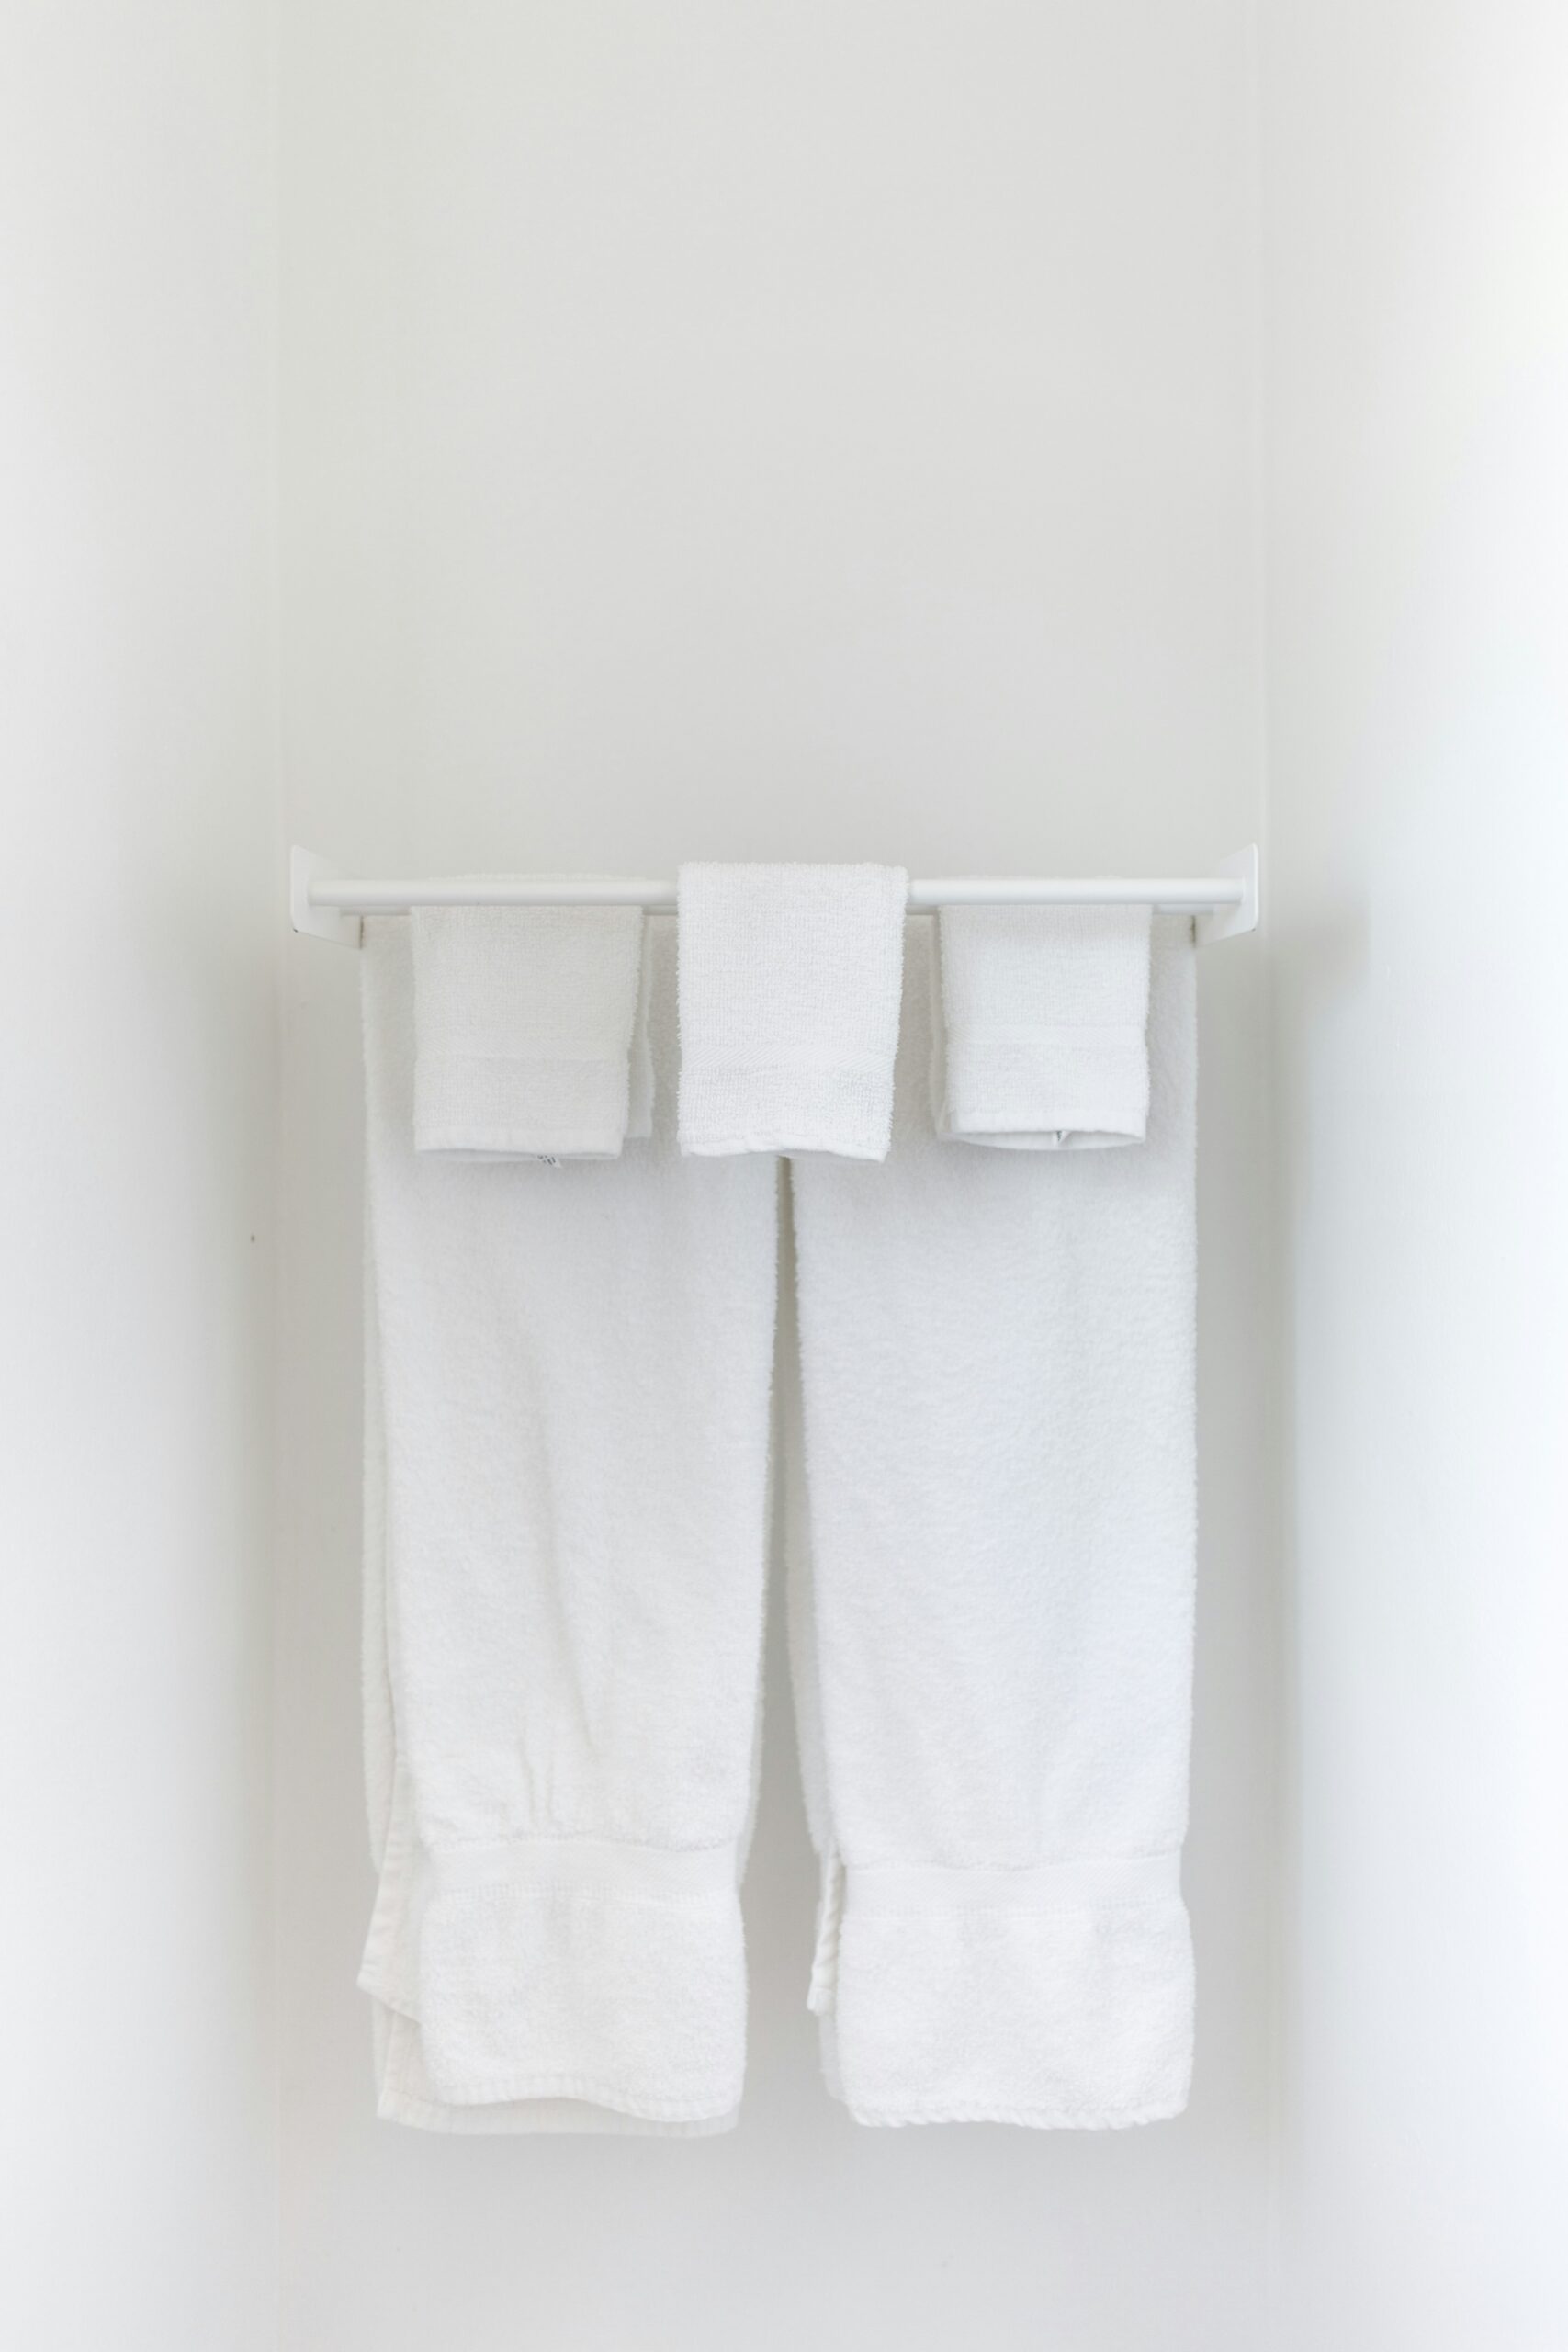 A set of clean, white towels